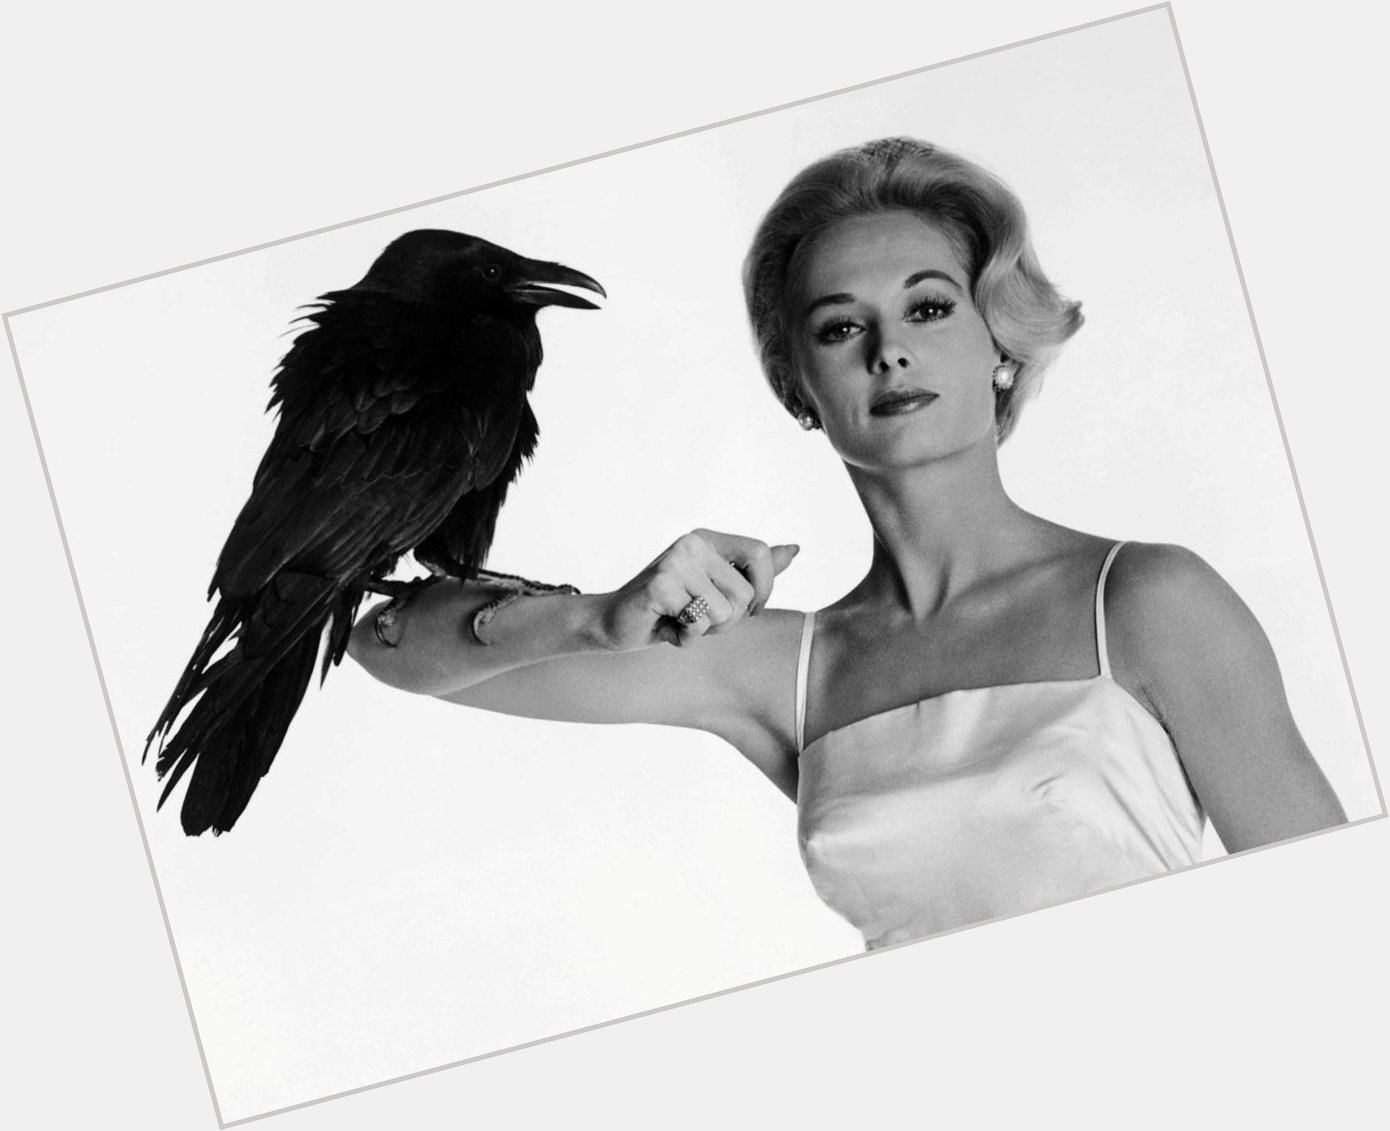 Wouldja\ve ever thought Tippi Hedren would go from running from birds to championing animals? Happy Birthday! 